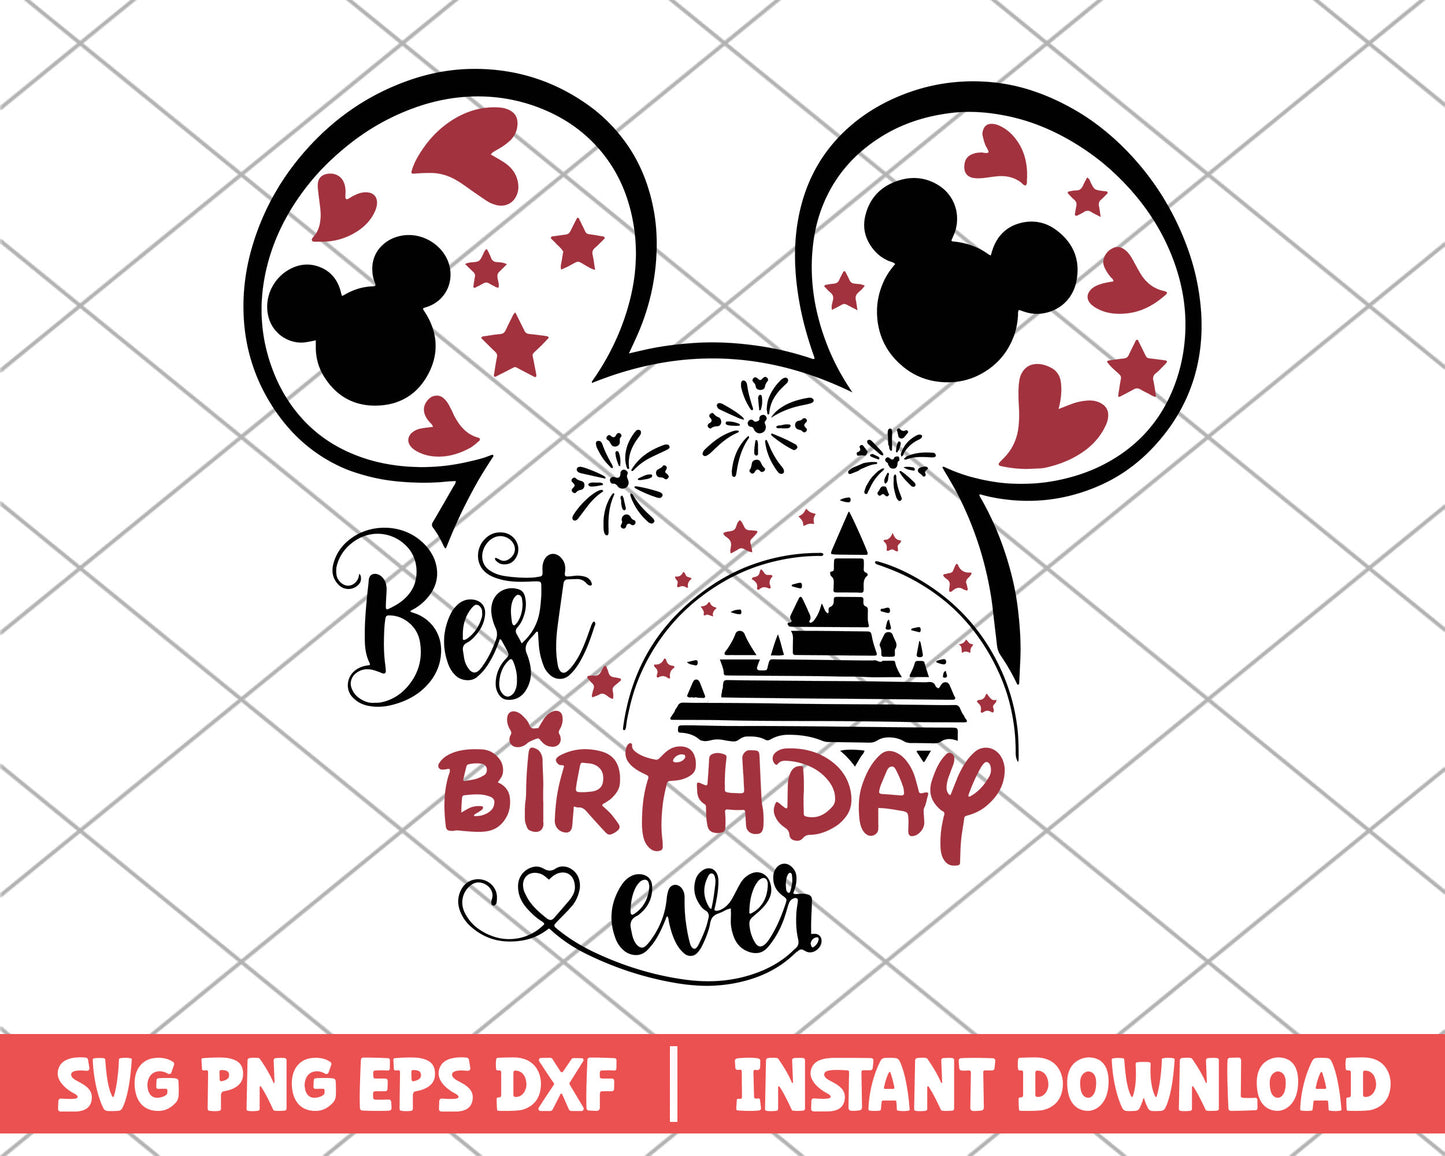 Best birthday ever mickey mouse svg